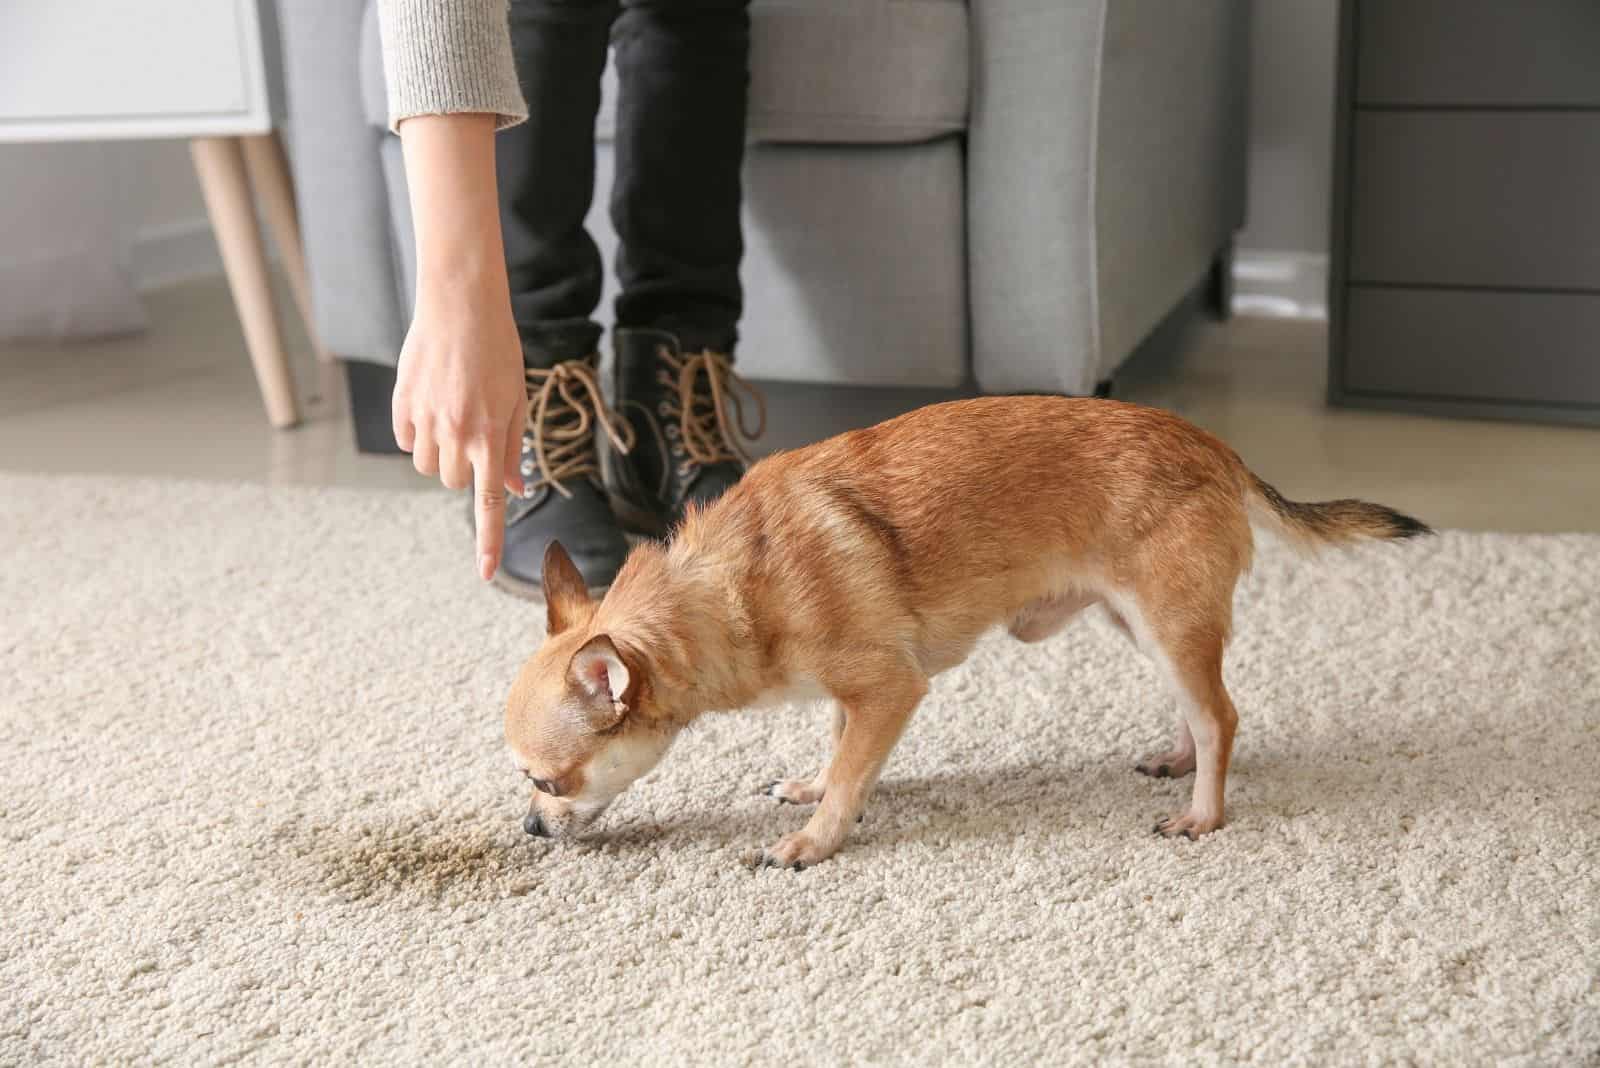 chihuahua smelling wet part on the carpet as pointed by the owner inside the house 